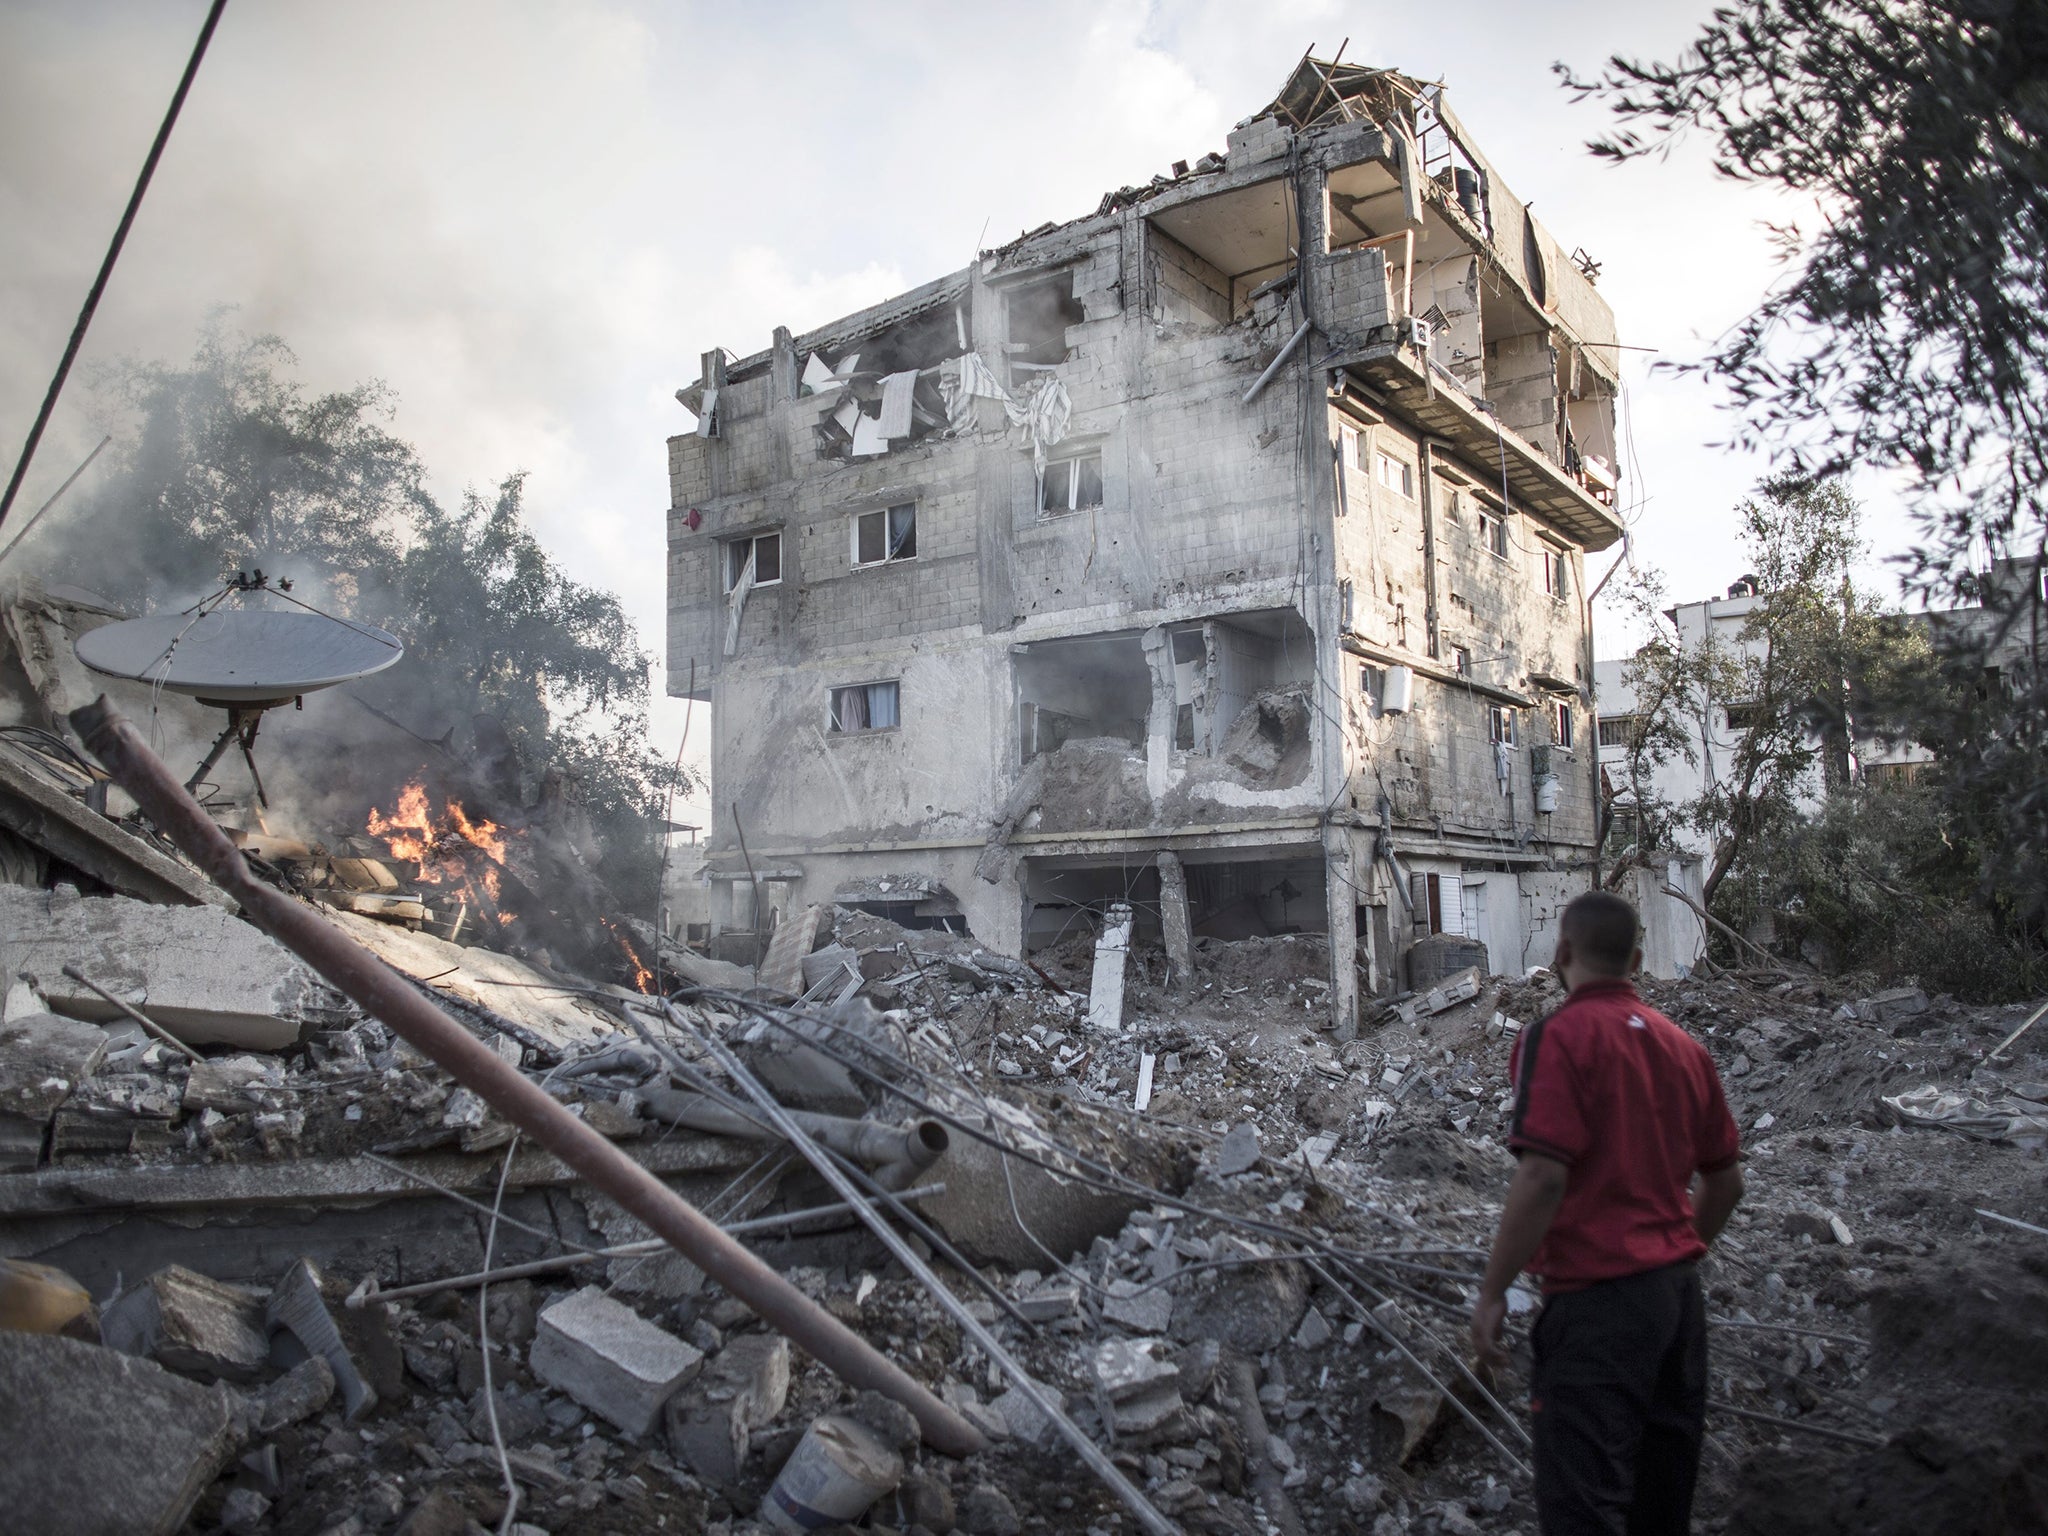 A Palestinian man looks at a house destroyed by Israeli Defense Forces during an overnight air strike in Gaza City